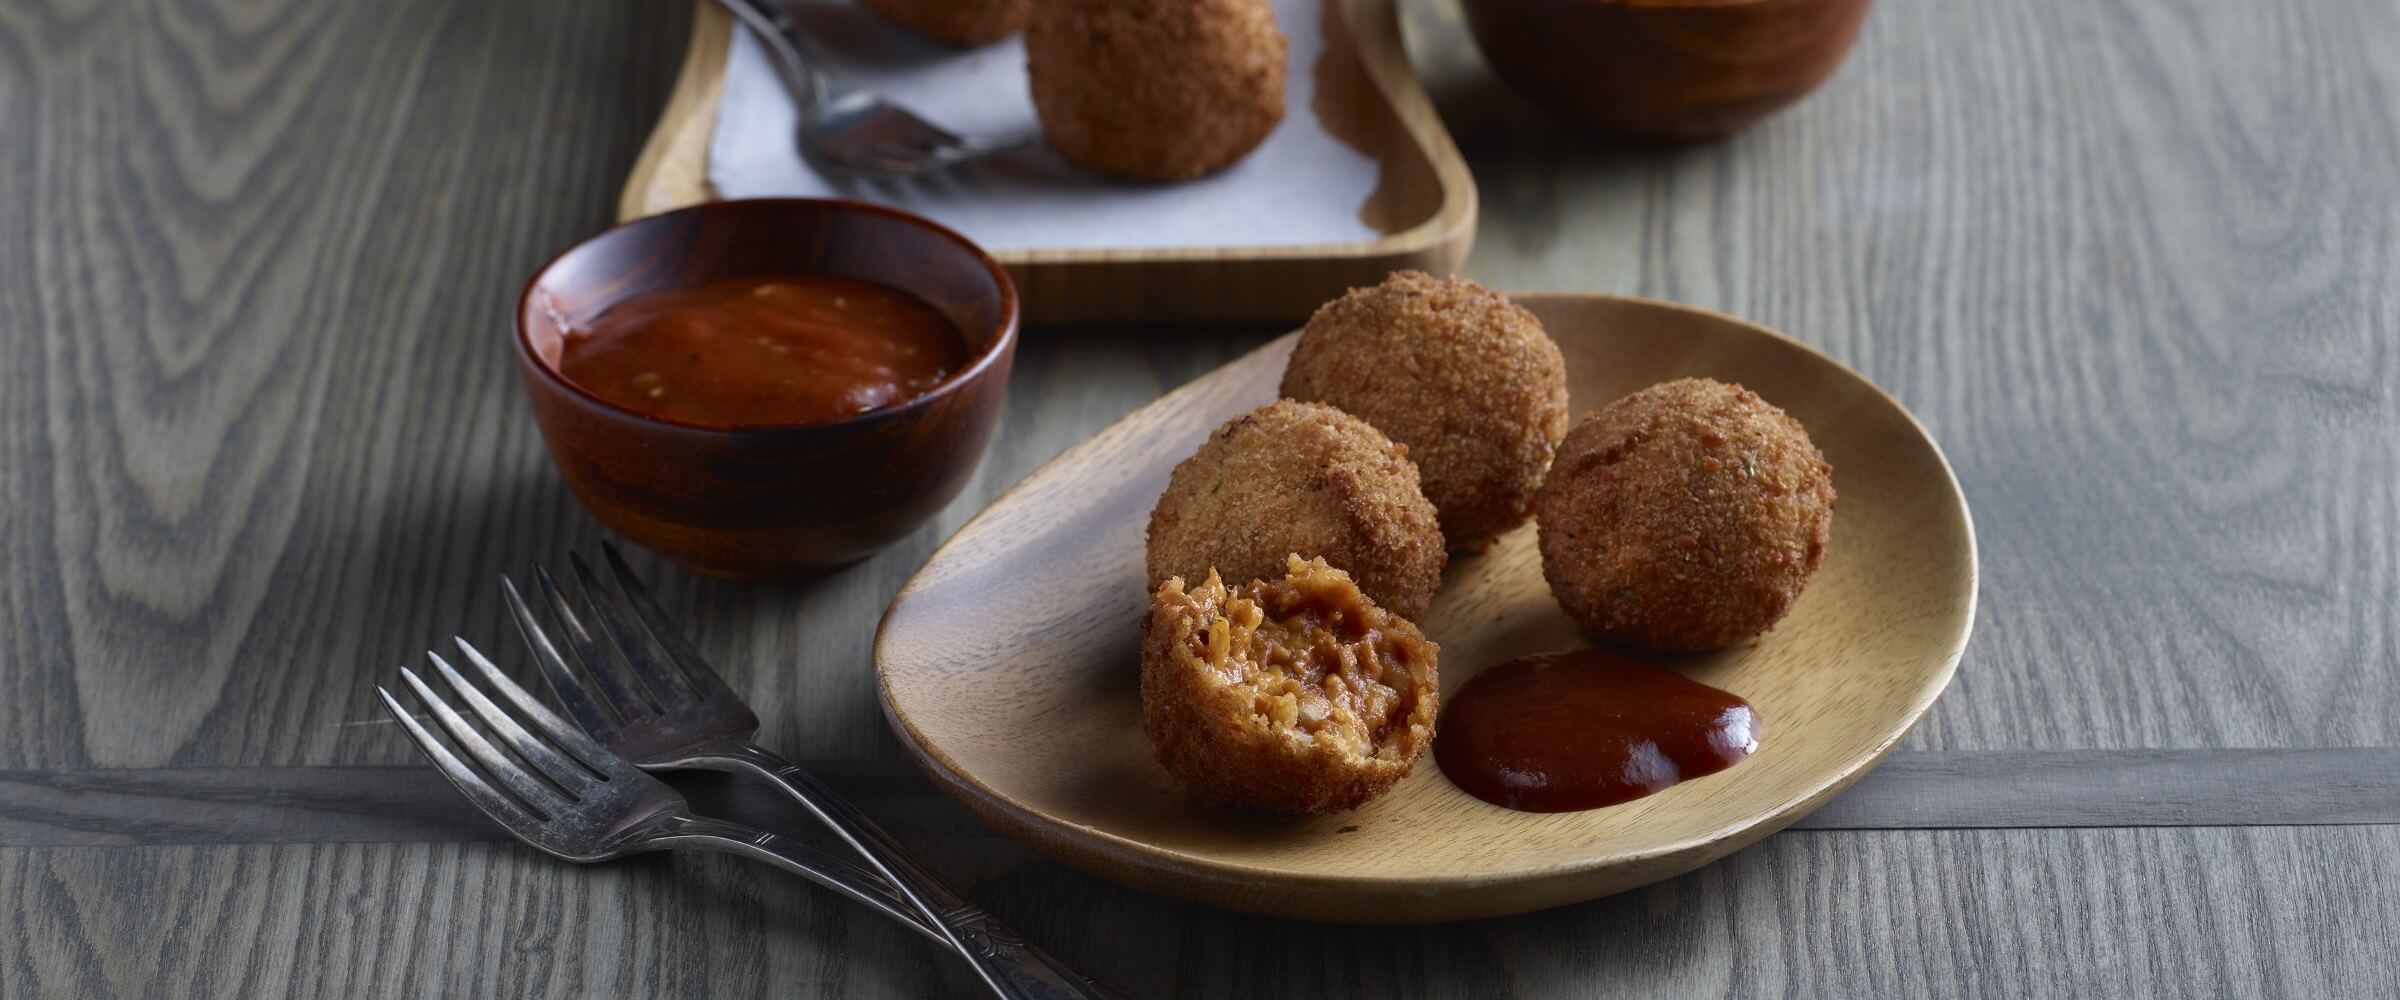 BBQ pulled pork arancini in wood bowl with dipping sauce and forks